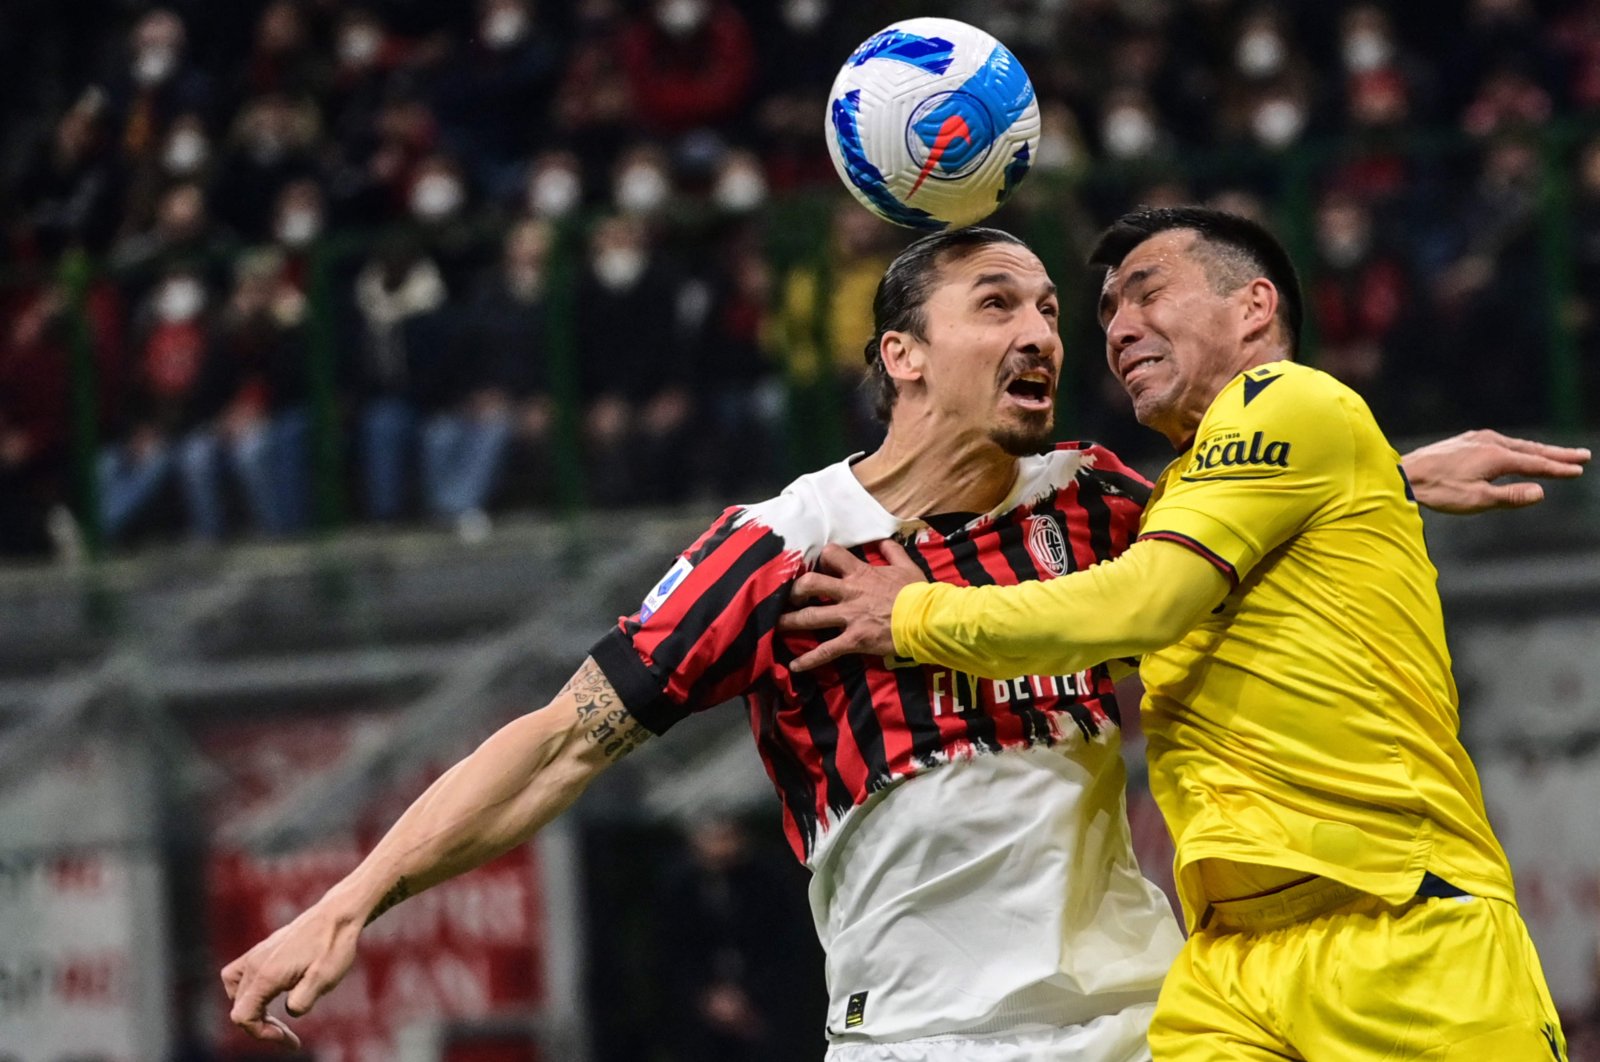 Milan&#039;s Zlatan Ibrahimovic and Bologna&#039;s Gary Medel (R) collide during a Serie A match, Milan, Italy, April 4, 2022. (AFP Photo)